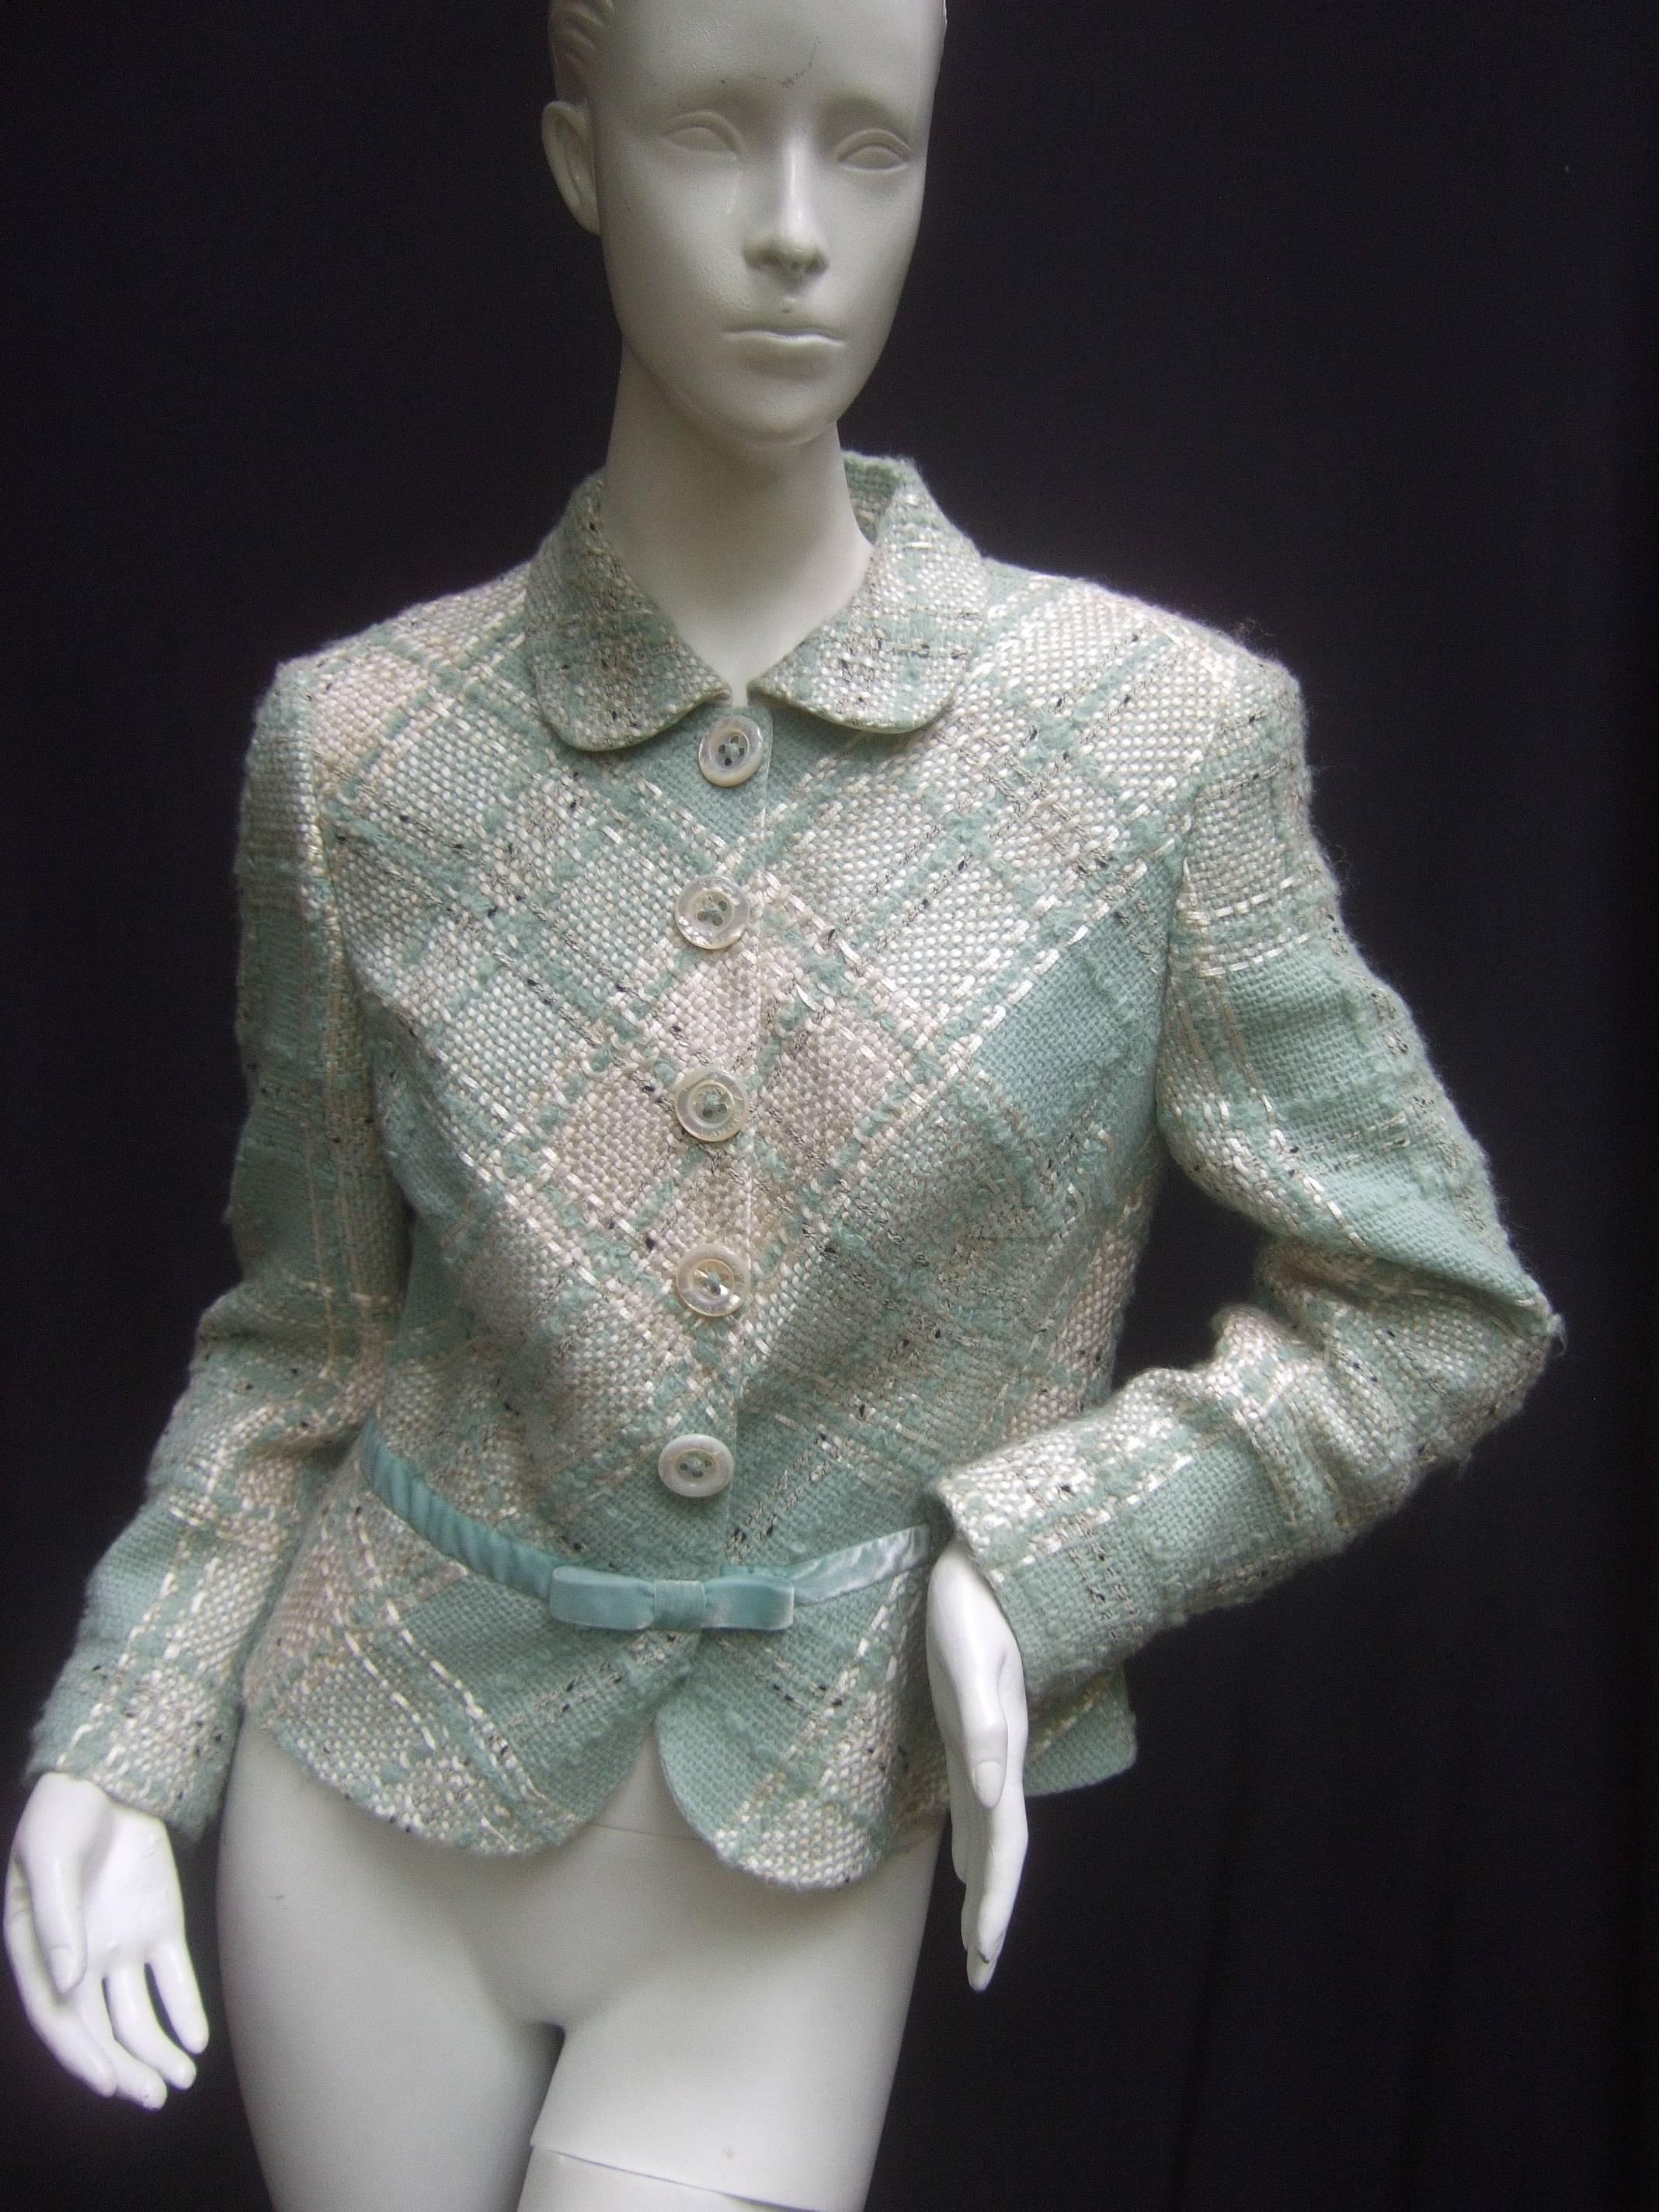 Rena Lange Pastel chunky wool knit fitted jacket 
The stylish designer jacket is a combination
of pale muted green and ivory textured knit 

Adorned with five large pearlized buttons 
that snap stamped Rena Lange. The waist 
section is